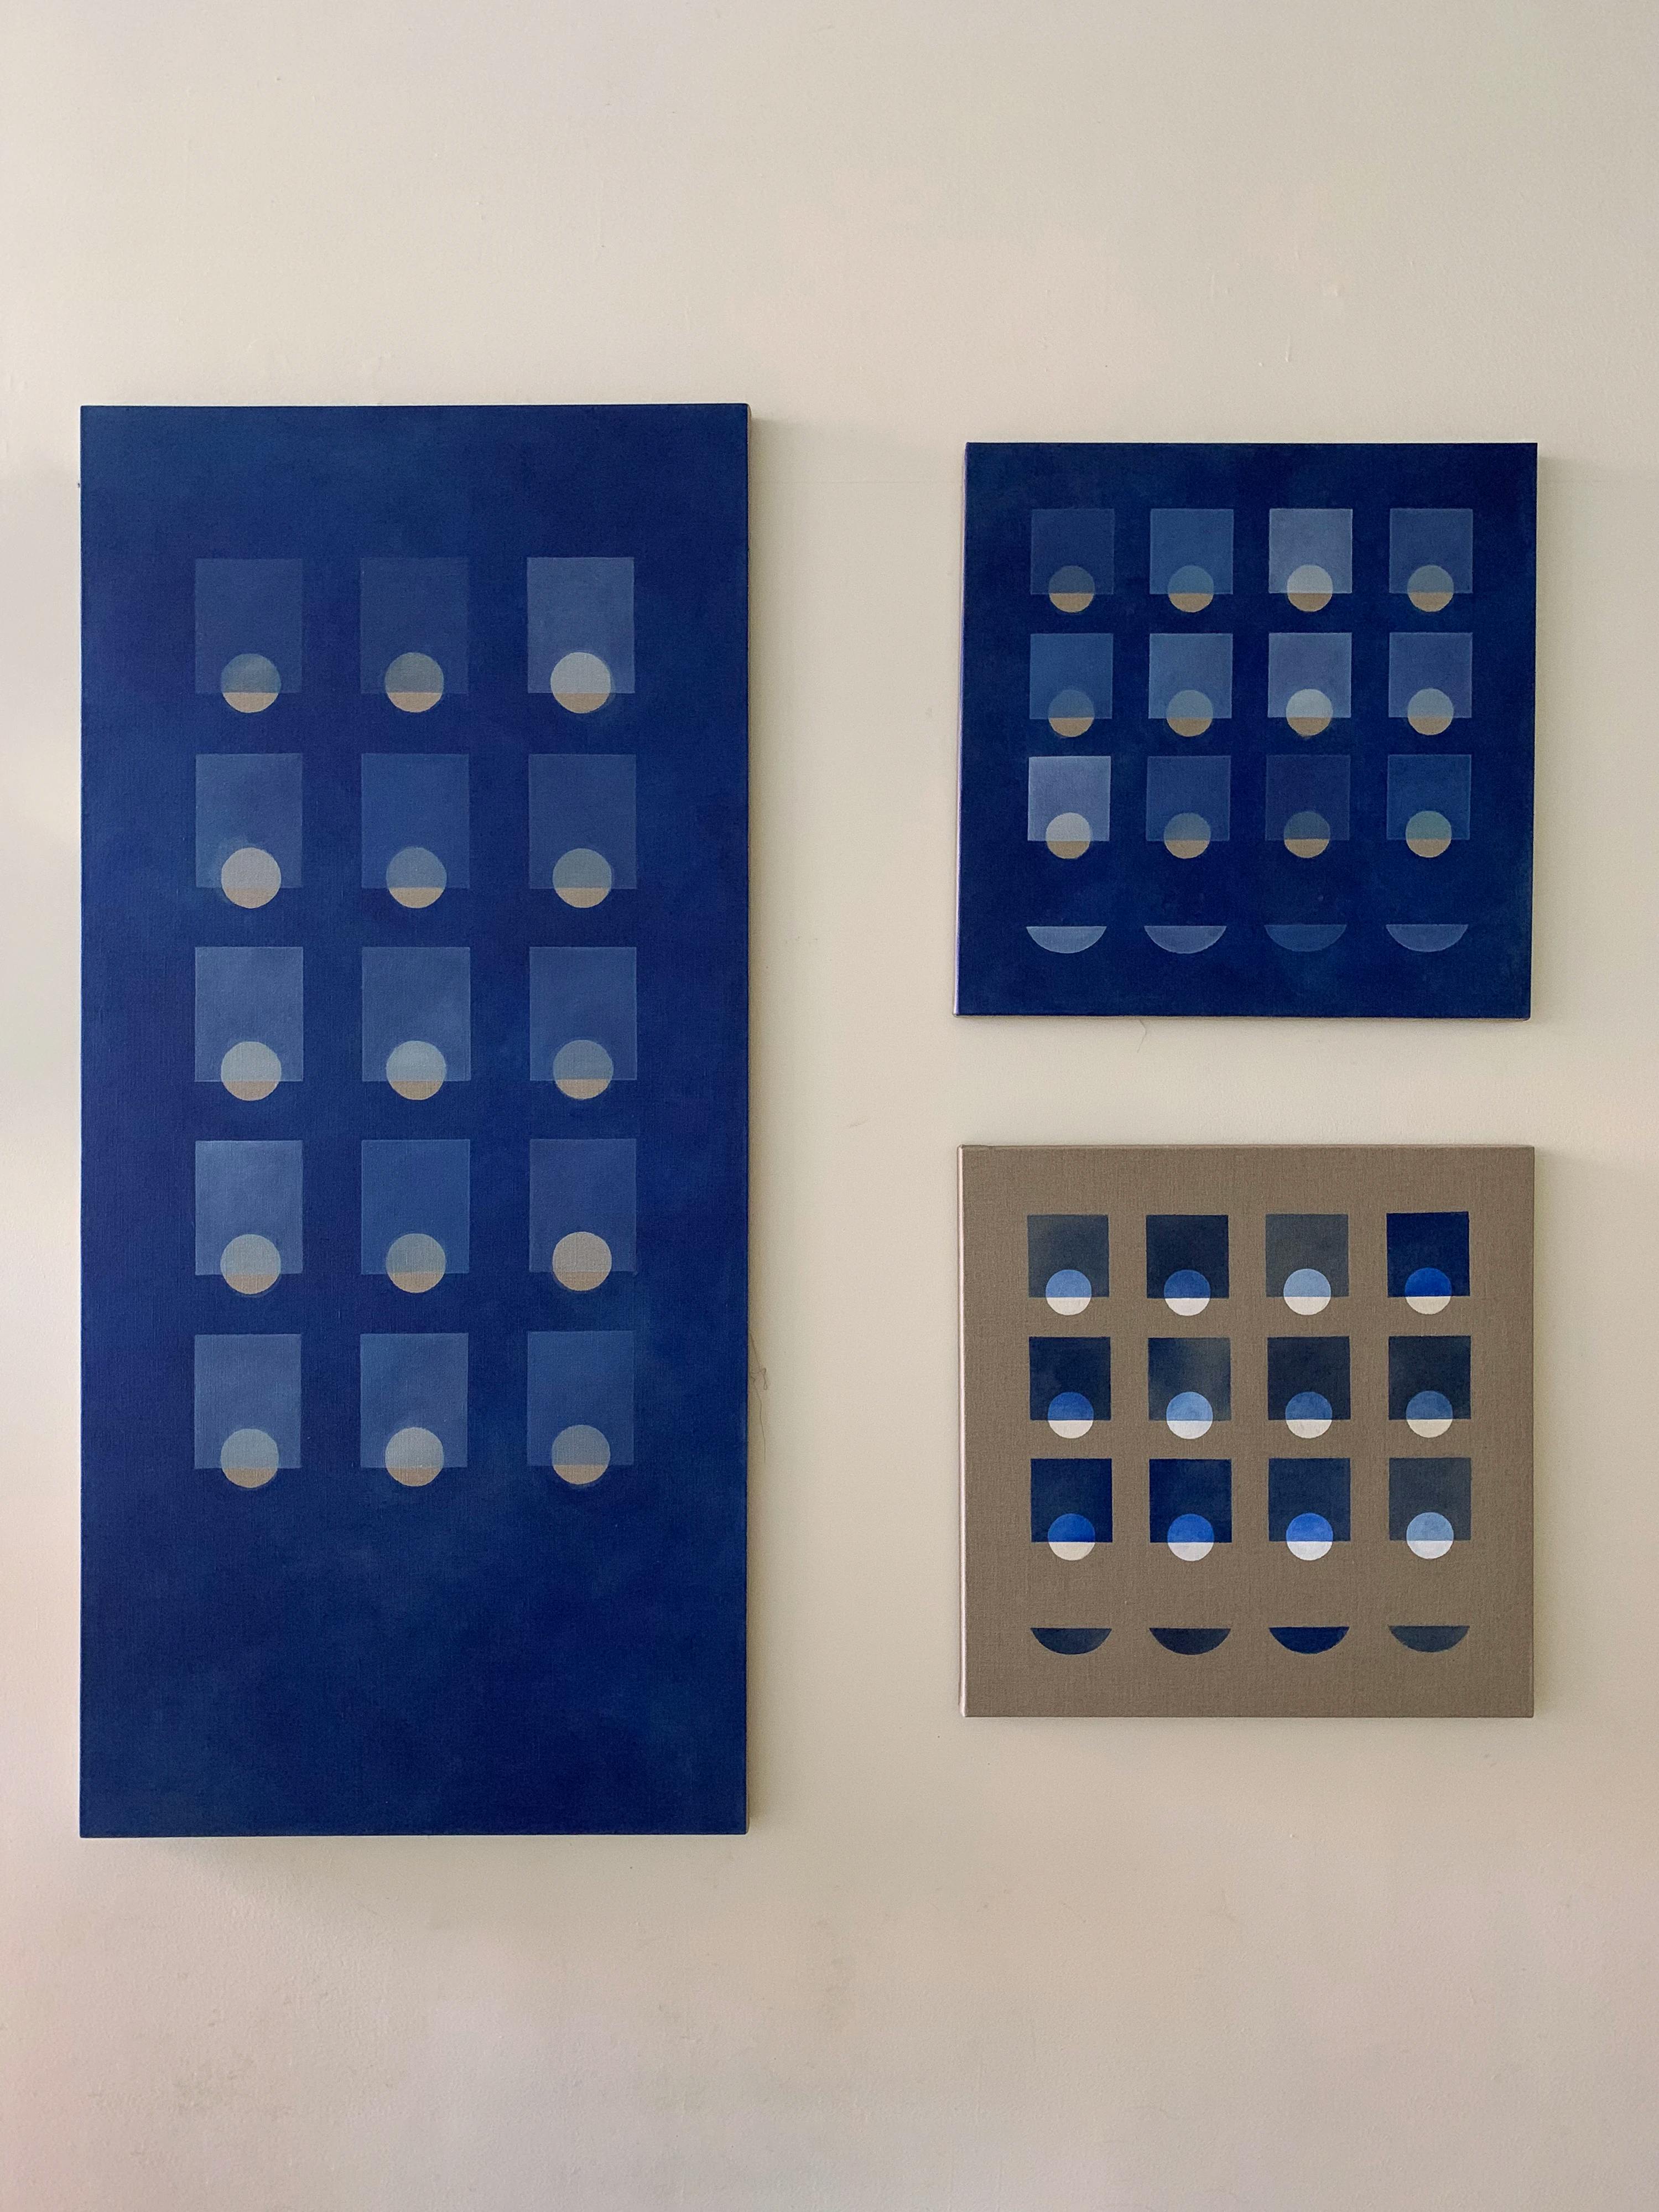 Three minimalist paintings with geometric grids by artist Carla Weeks installed on a white wall.